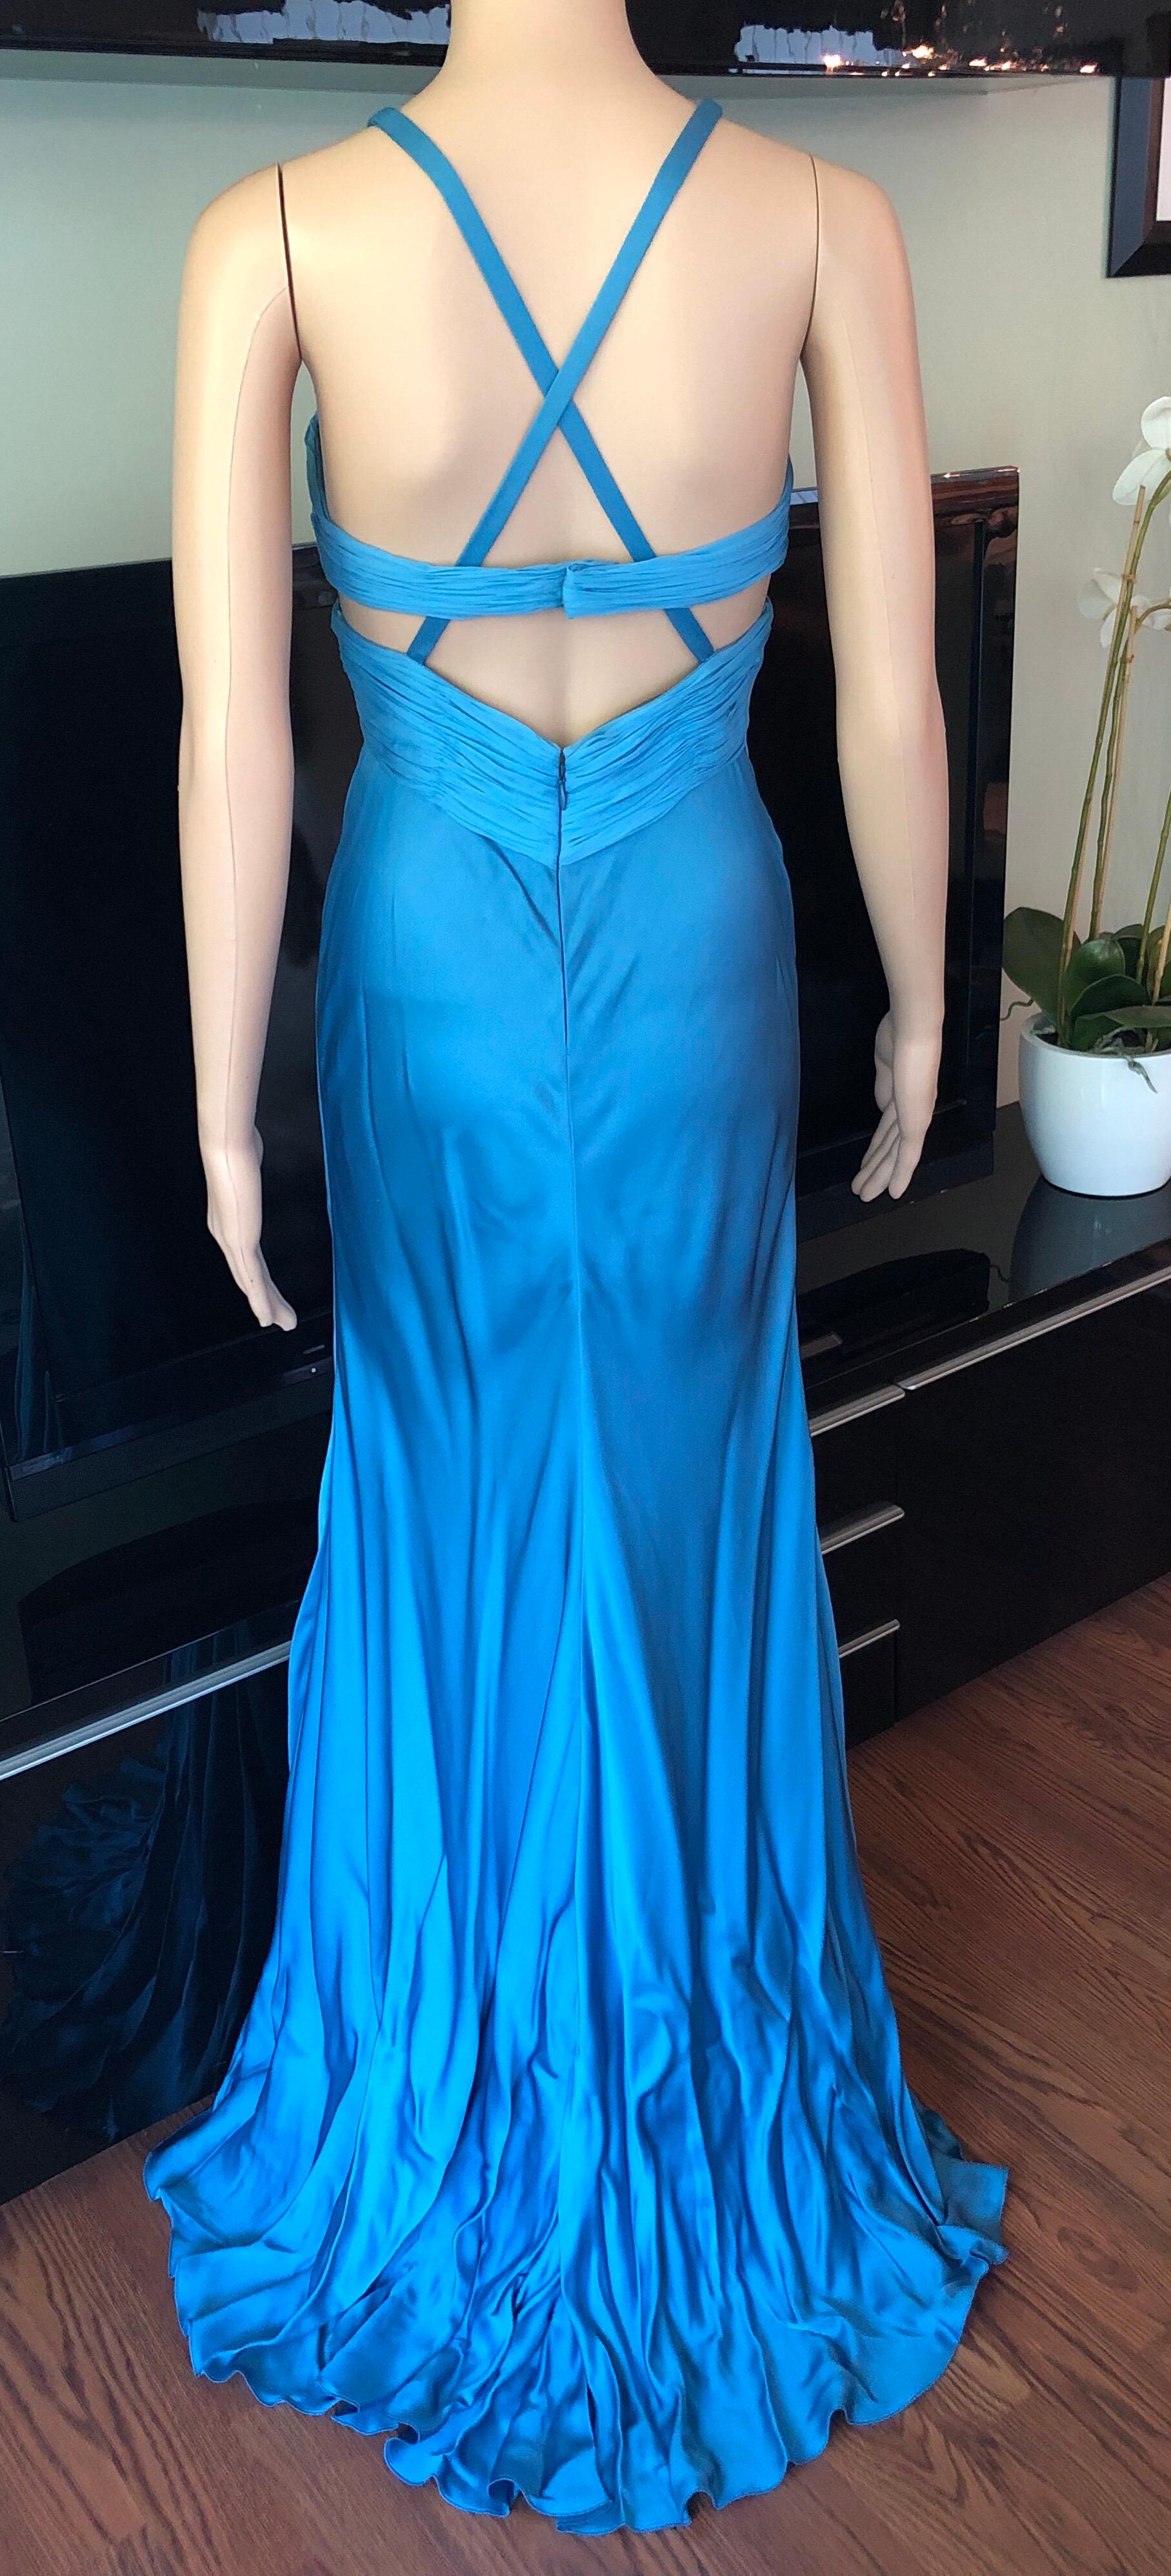 Versace S/S 2004 Bustier Open Back High Slit Blue Dress Gown In Good Condition For Sale In Naples, FL